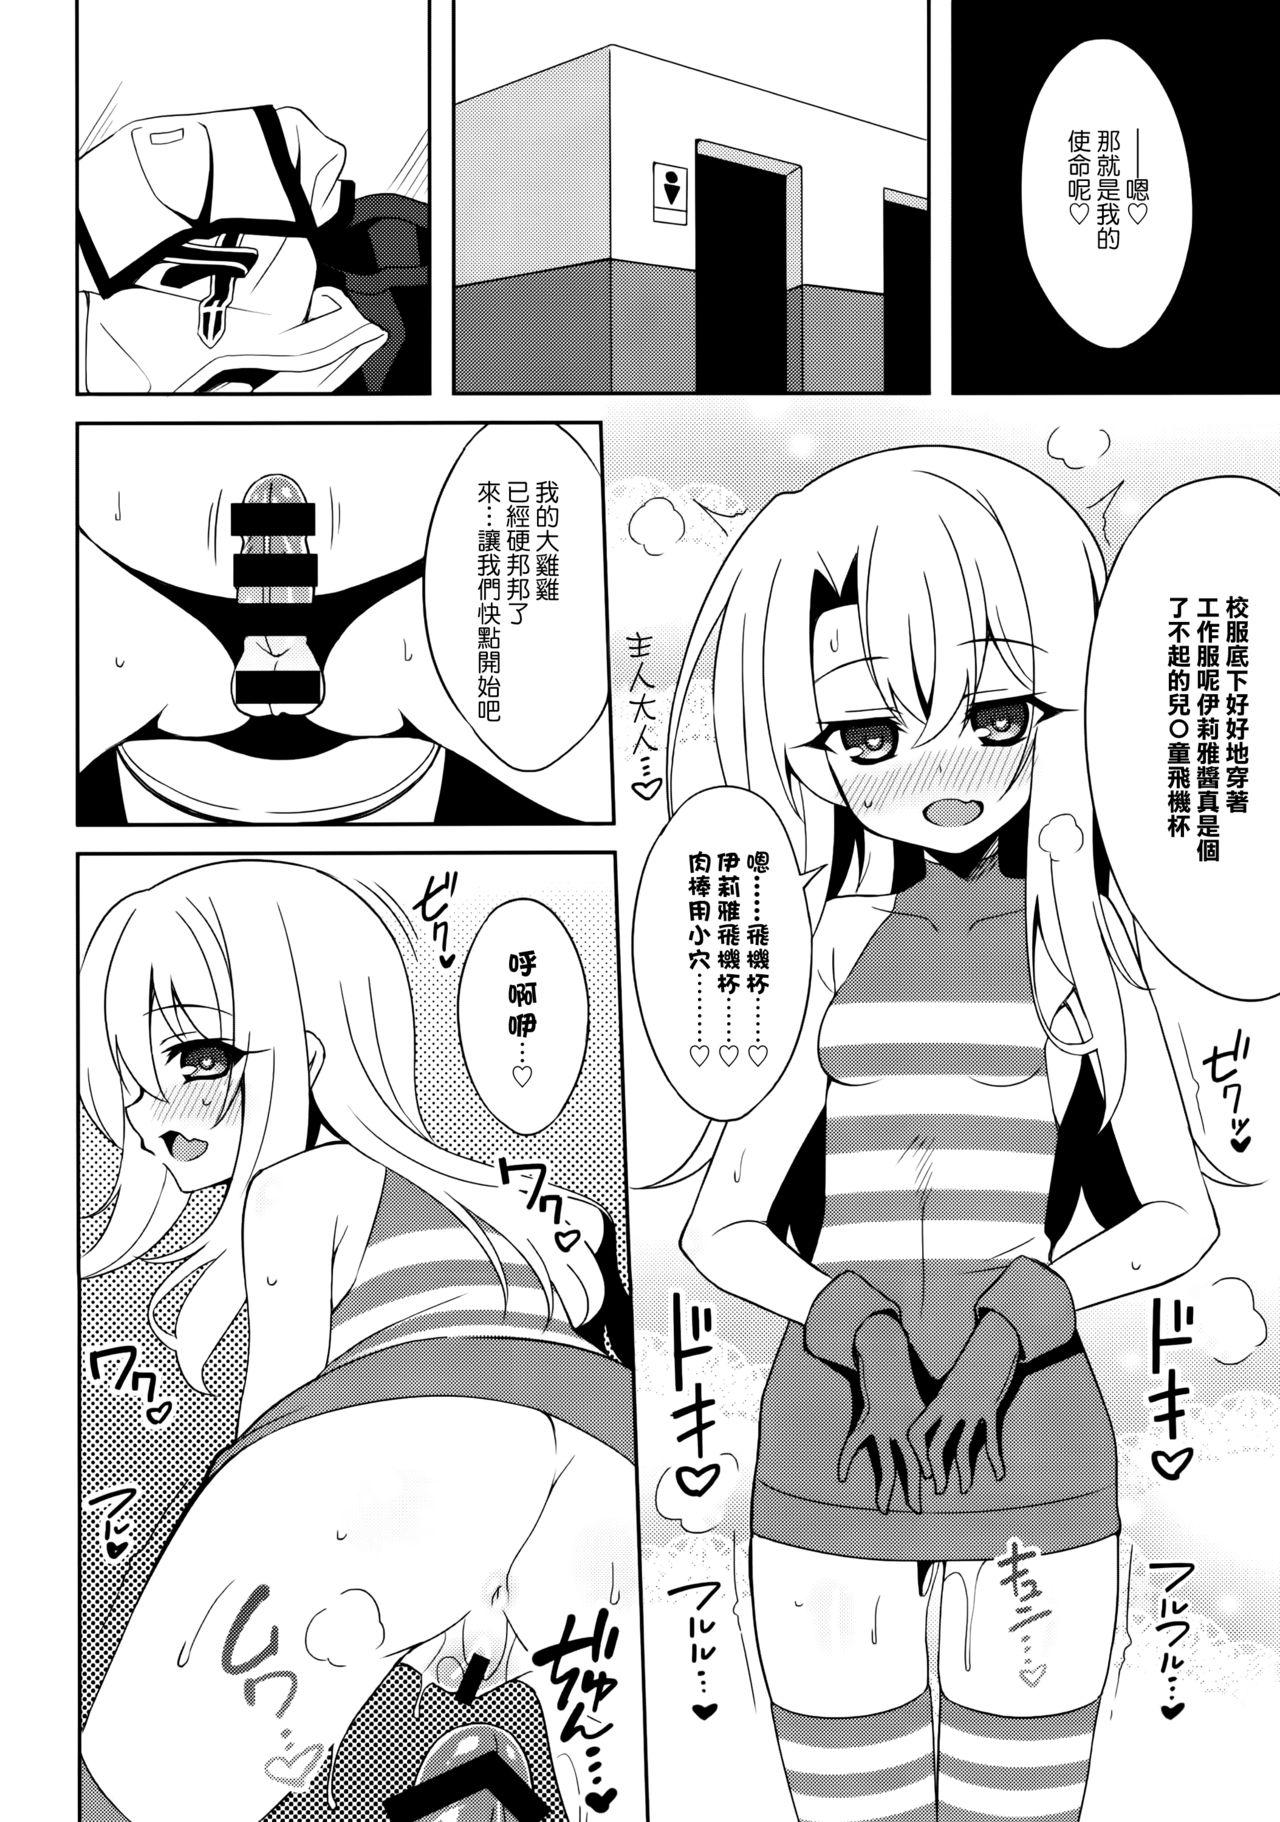 Banging Marunaho-chan Install - Fate kaleid liner prisma illya Roughsex - Page 5